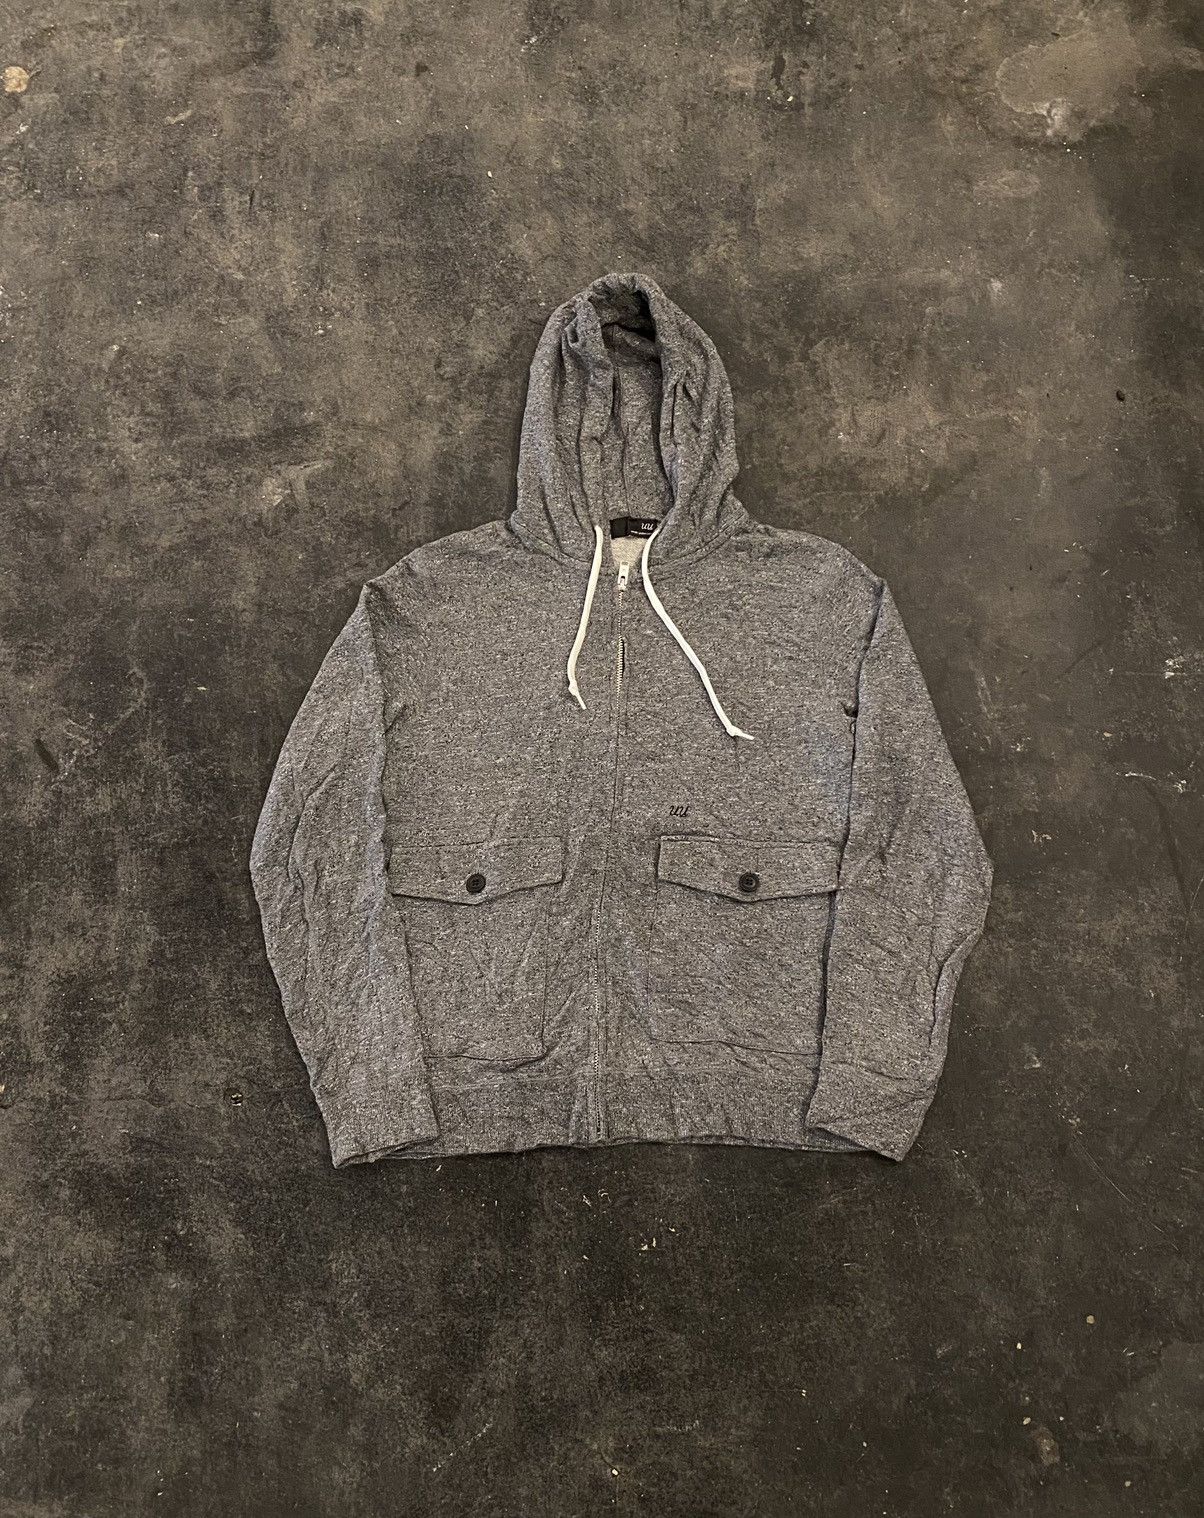 Undercover Undercover X Wtaps 99' UpArmored Hoodie | Grailed